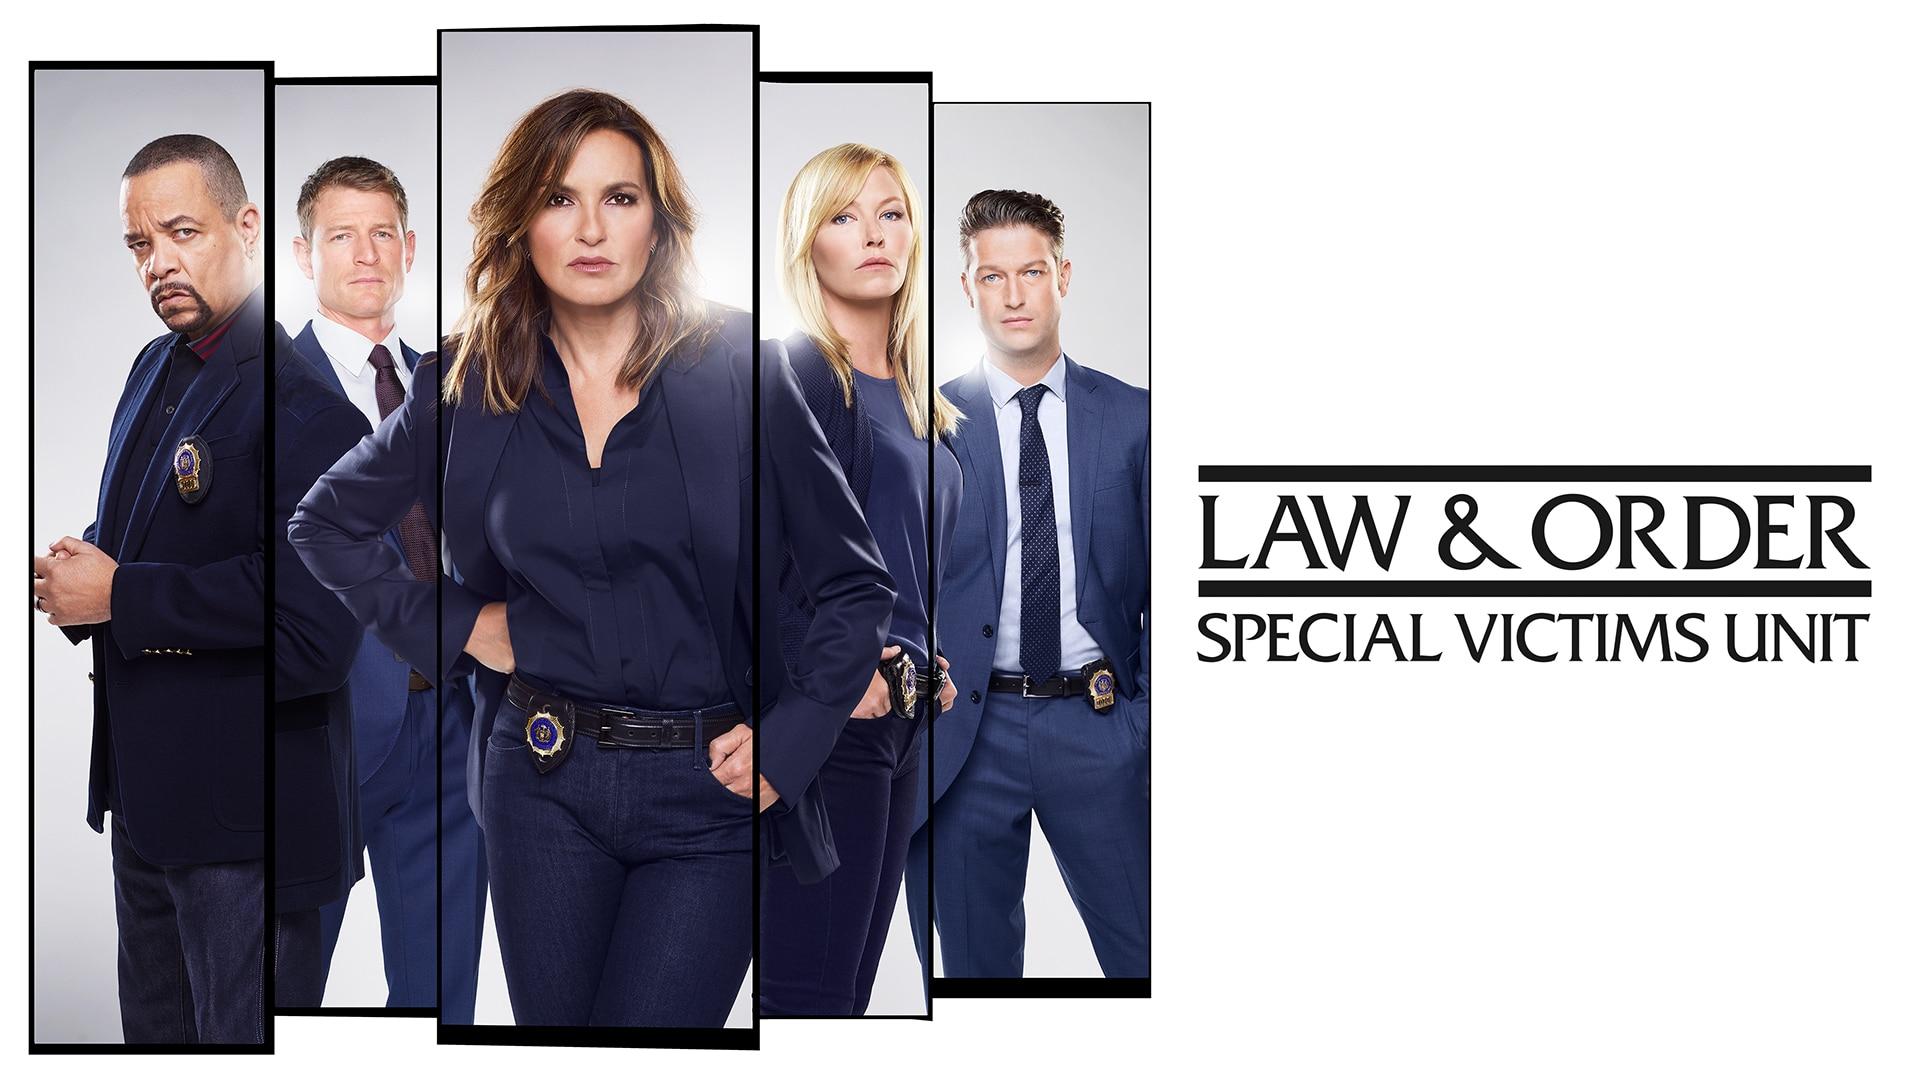 Law & Order: Special Victims Unit: Photo Galleries